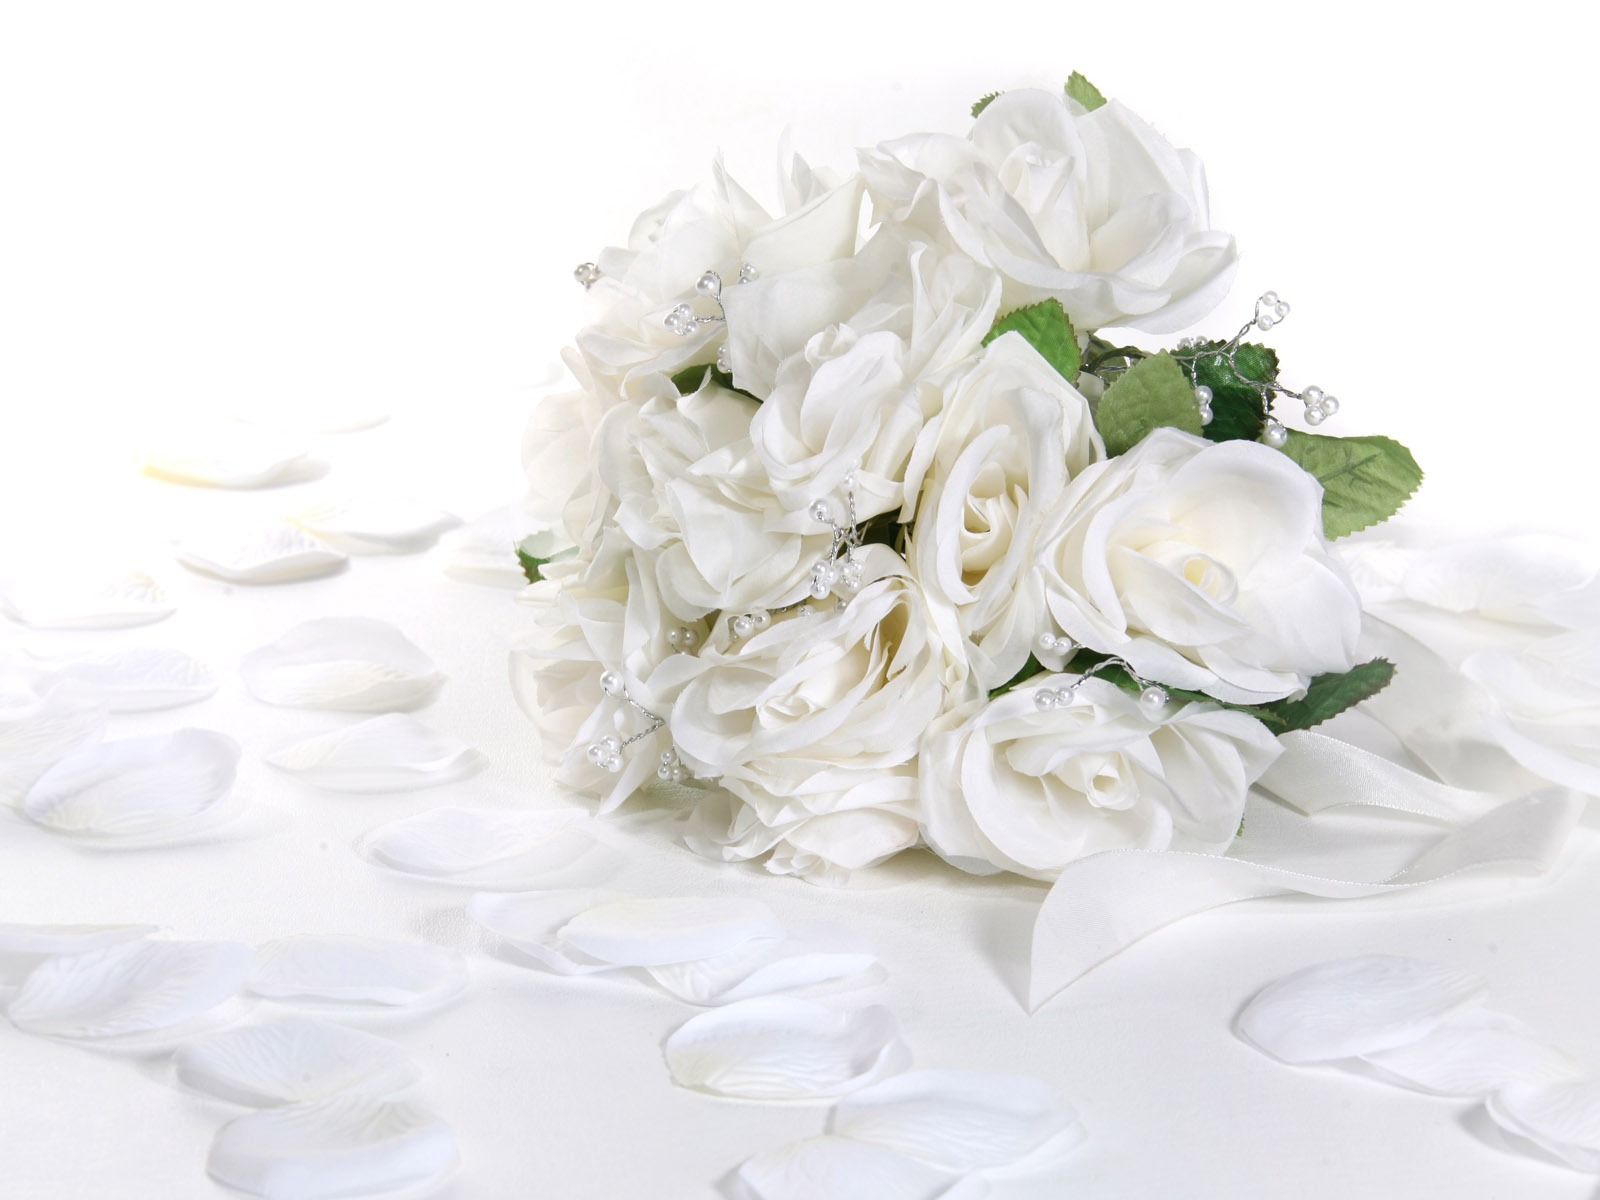 Weddings and Flowers wallpaper (2) #2 - 1600x1200